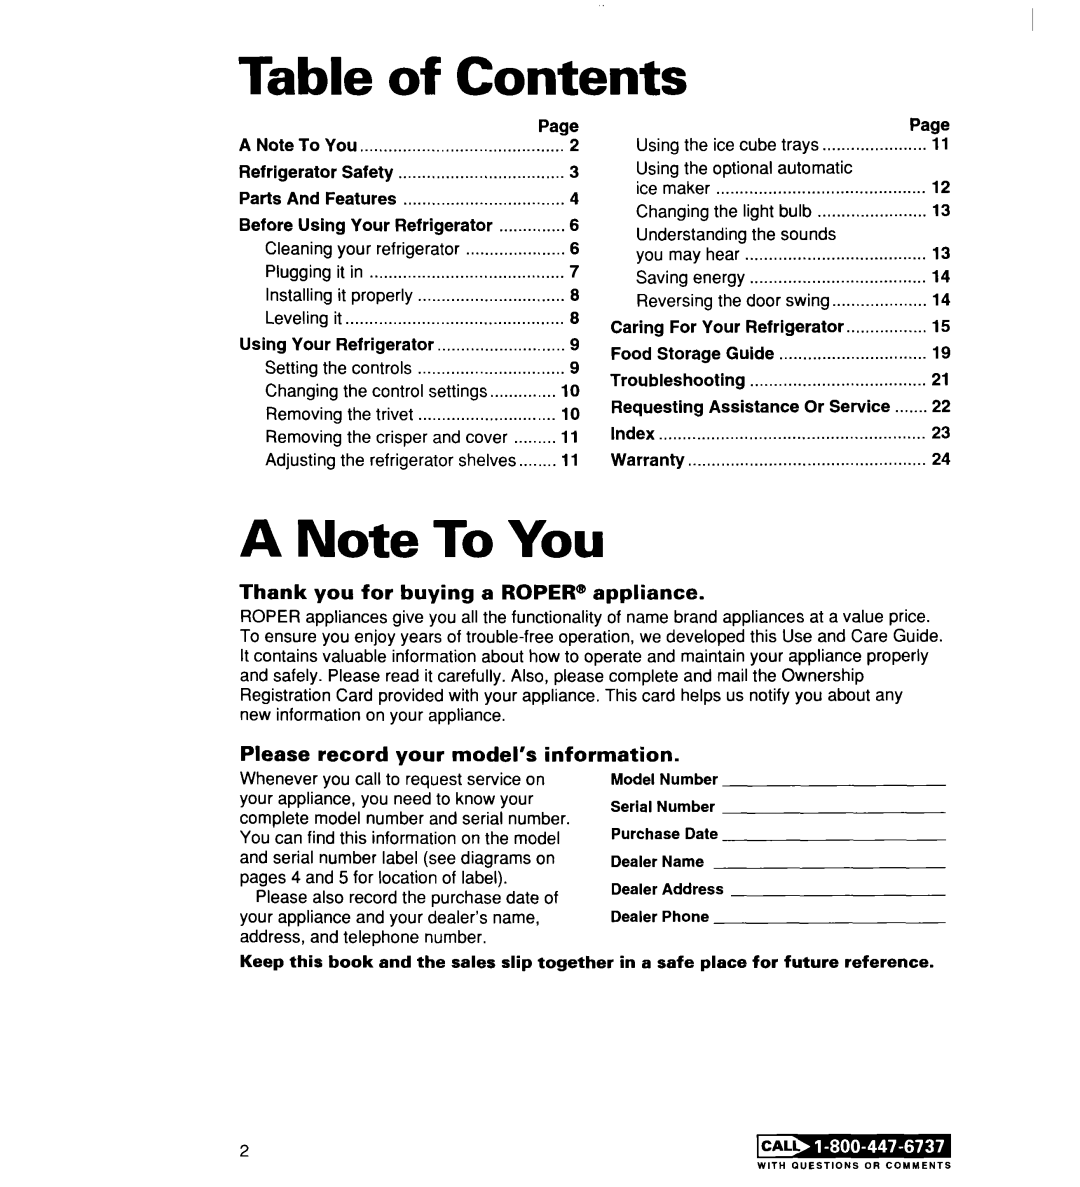 Whirlpool RT14DKXE, RT14ECRE warranty Table of Contents, A Note To You, Thank you for buying a ROPER@ appliance 